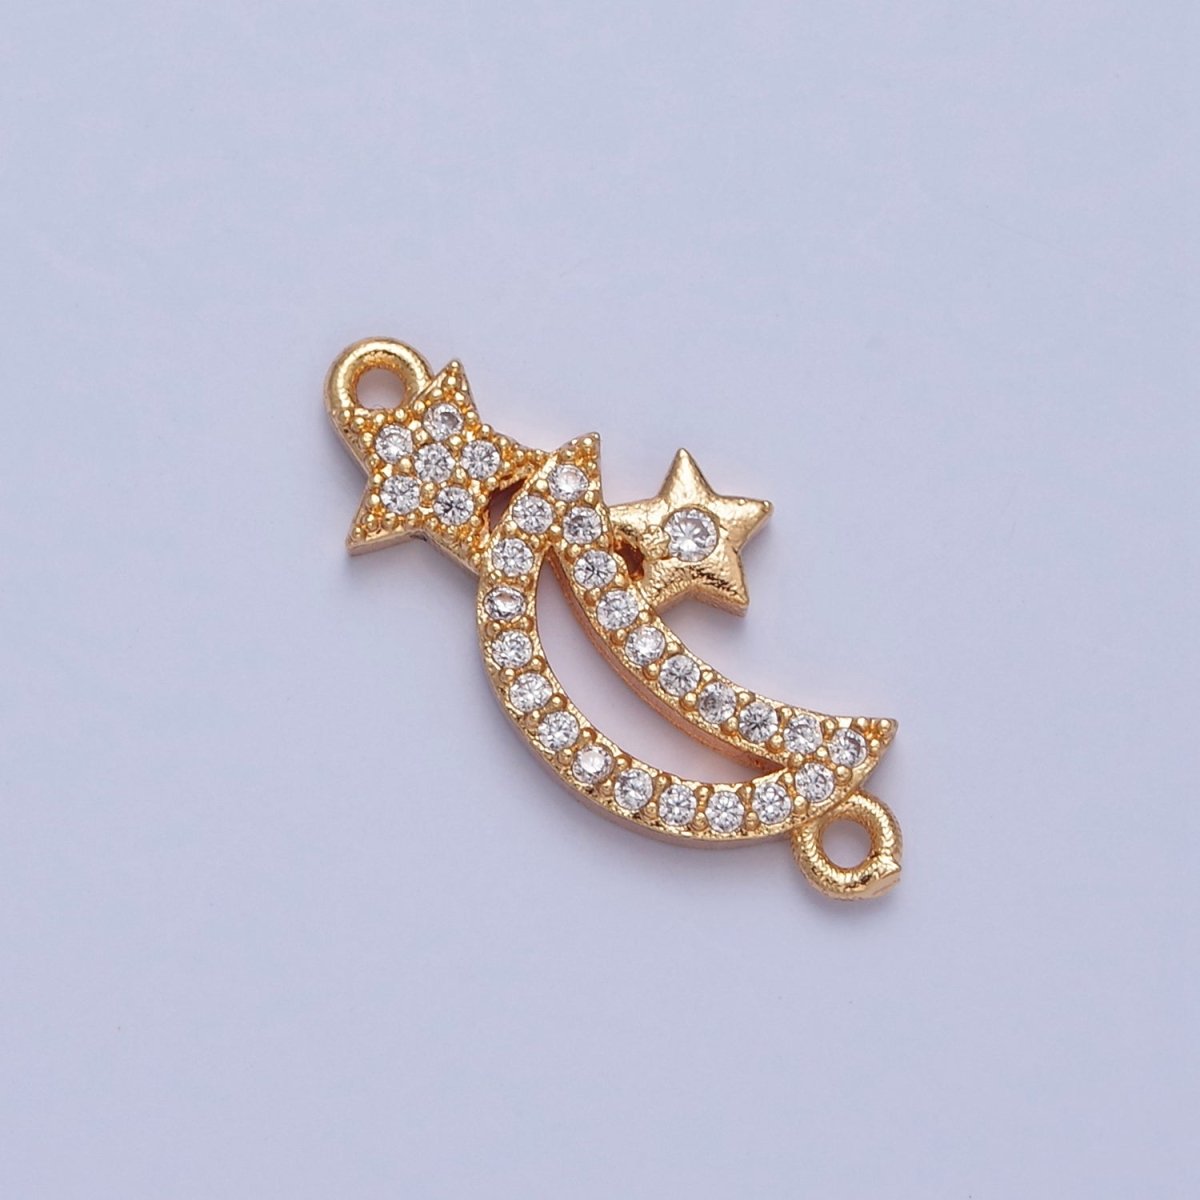 Dainty Crescent Moon Star CZ Gold Pave Charm Connector for Bracelet Necklace Supply F-556 - DLUXCA